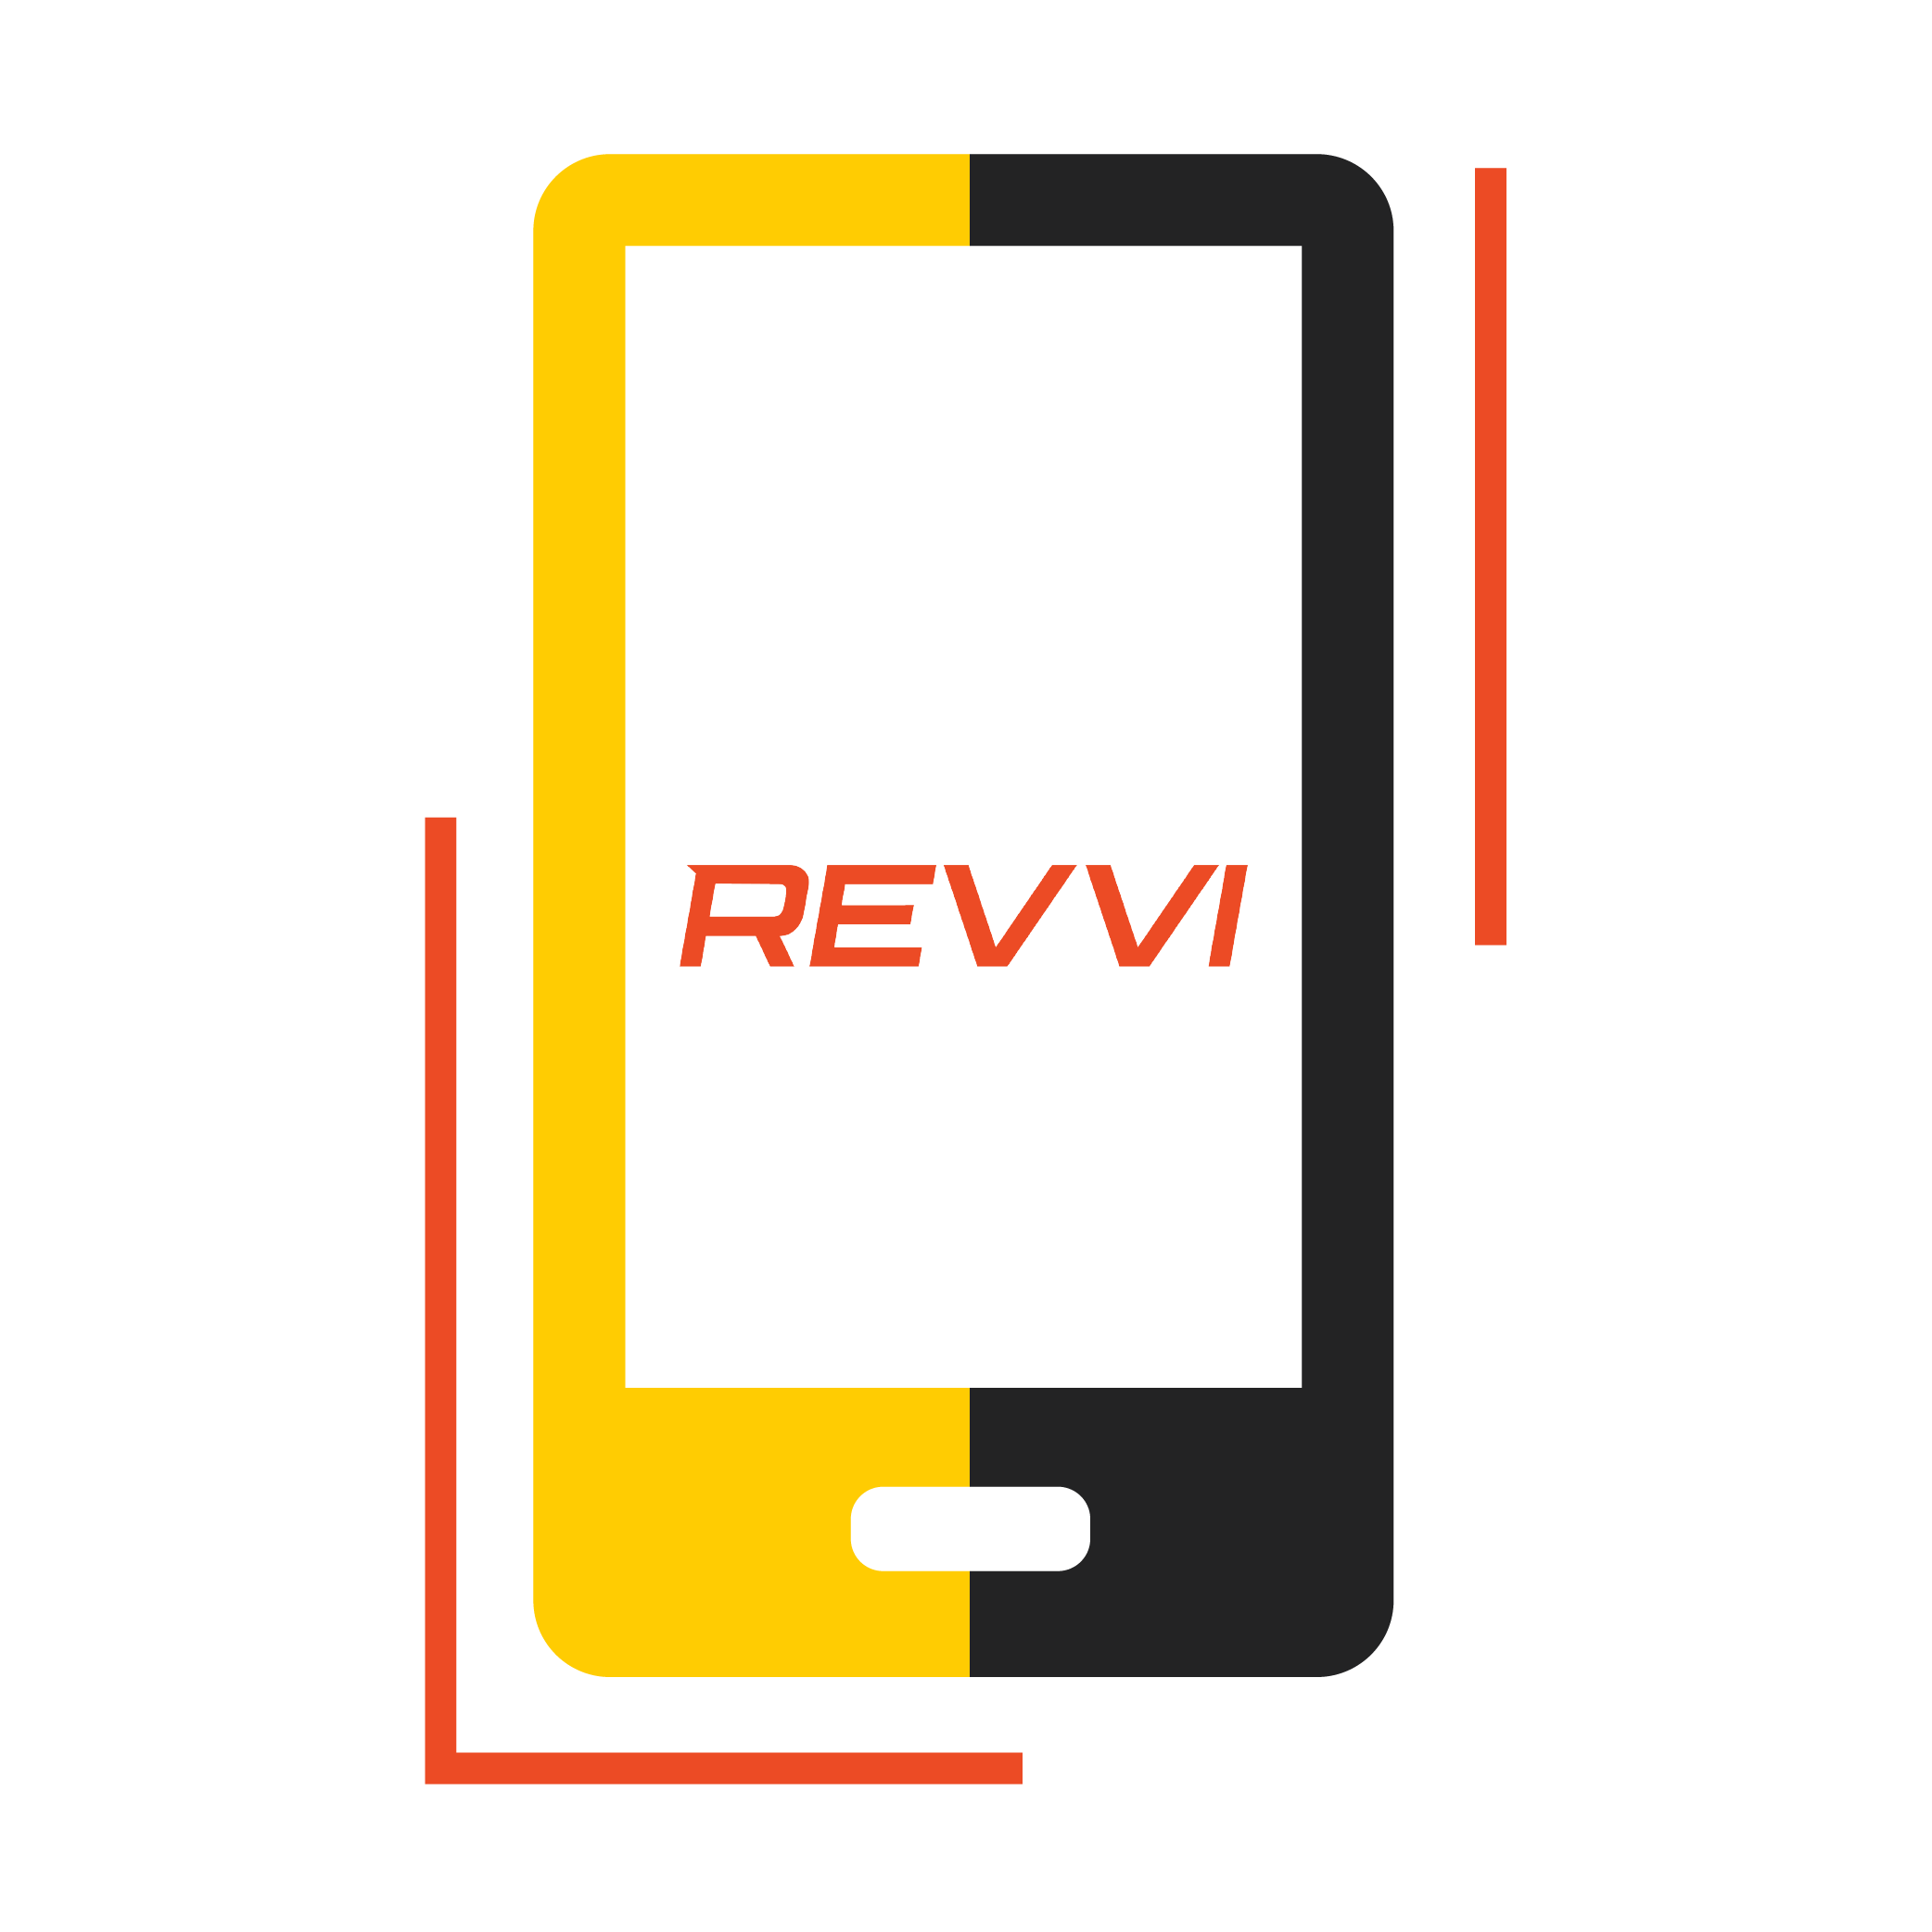 Revvi Card Mobile App is available in Apple App Store and Google Play Store